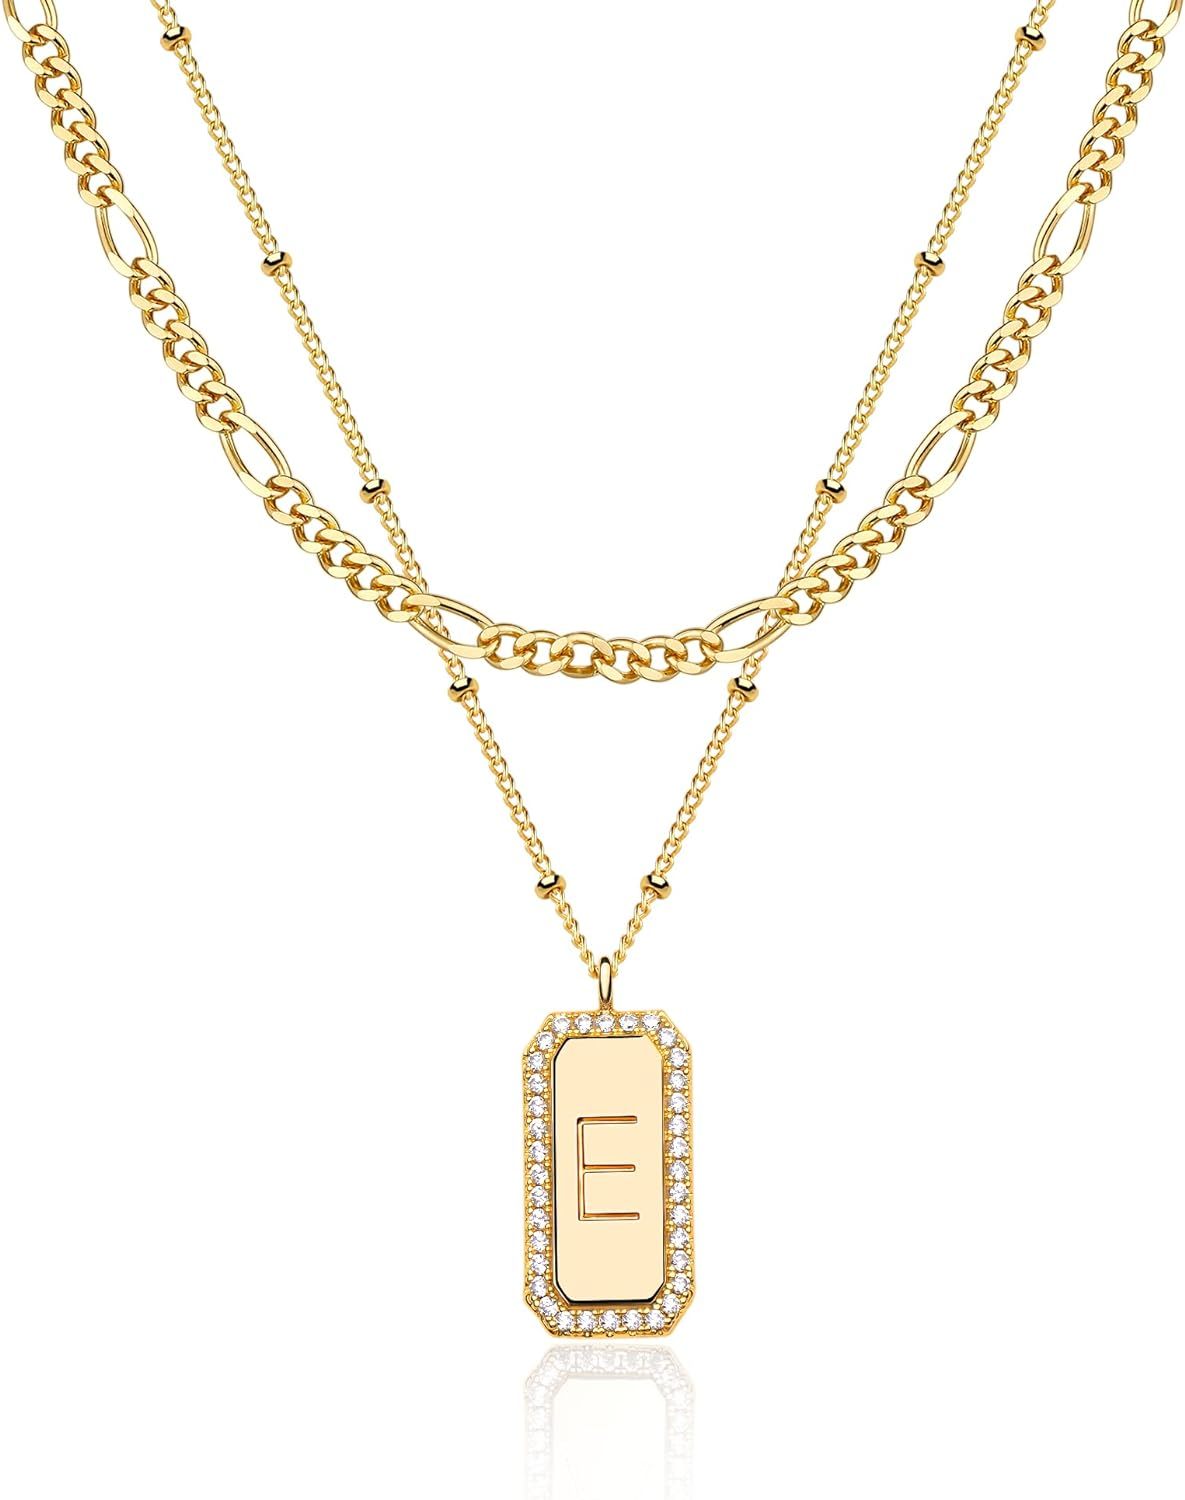 Primary image for 2 Layered Initial (E) Bar Rectangle Pendant Necklace 